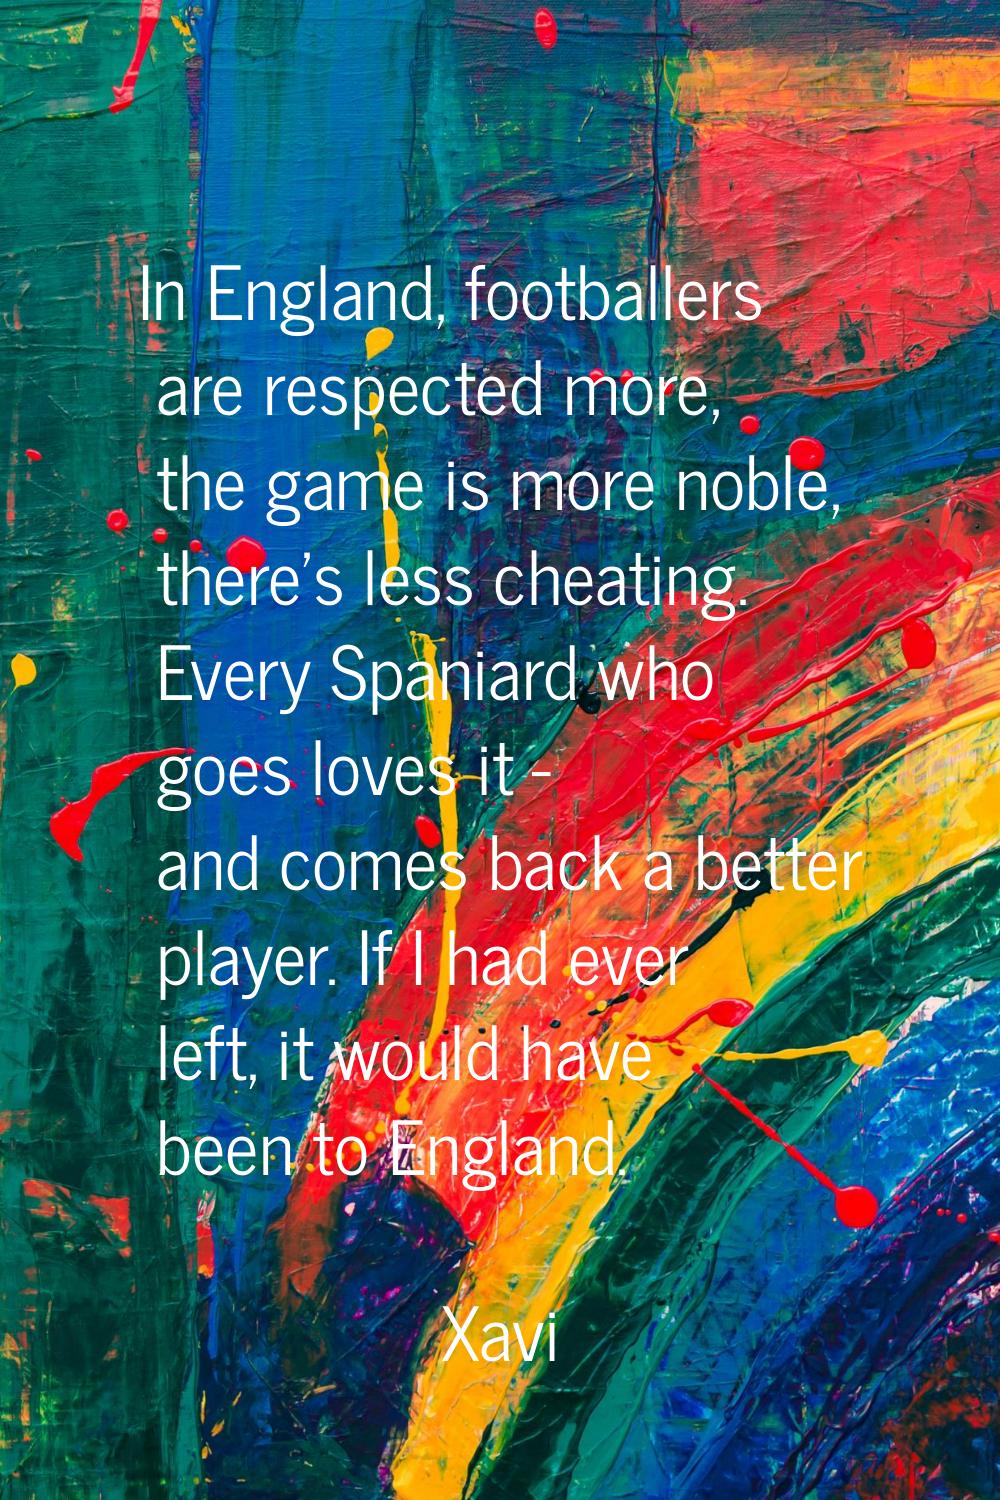 In England, footballers are respected more, the game is more noble, there's less cheating. Every Sp